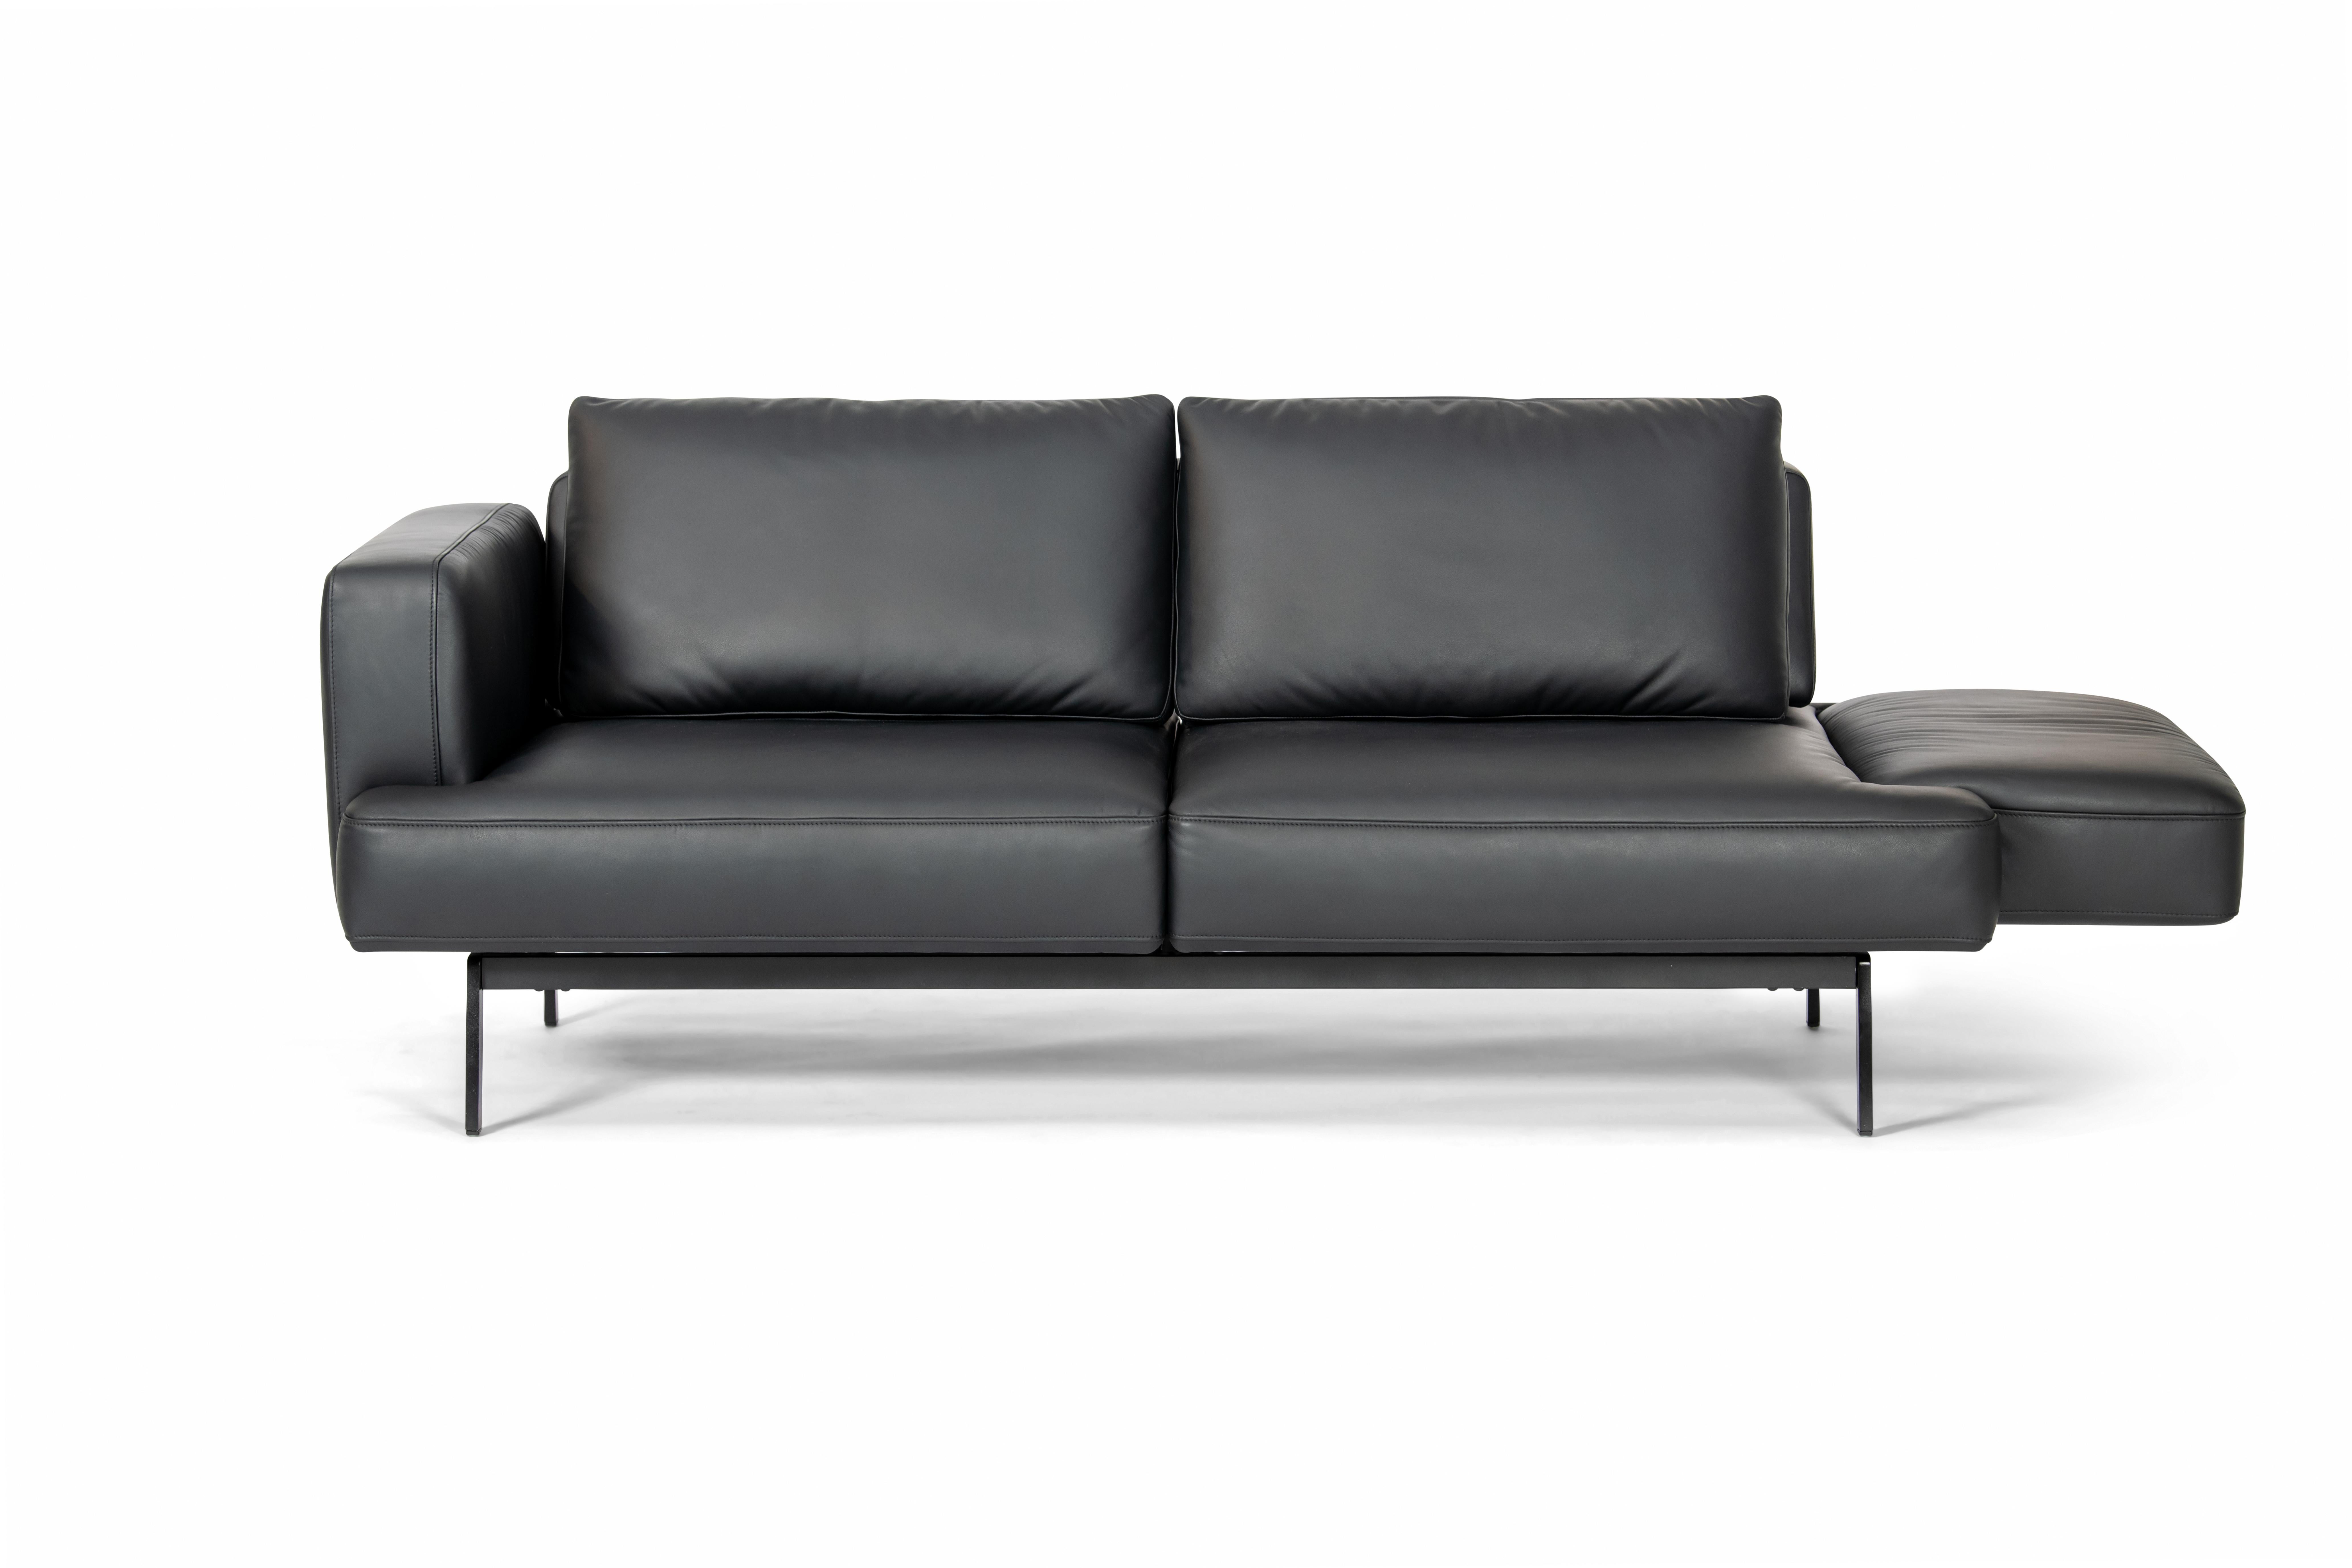 Contemporary De Sede DS-747/23 Multifunctional Sofa in Black Leather Seat and Back Upholstery For Sale